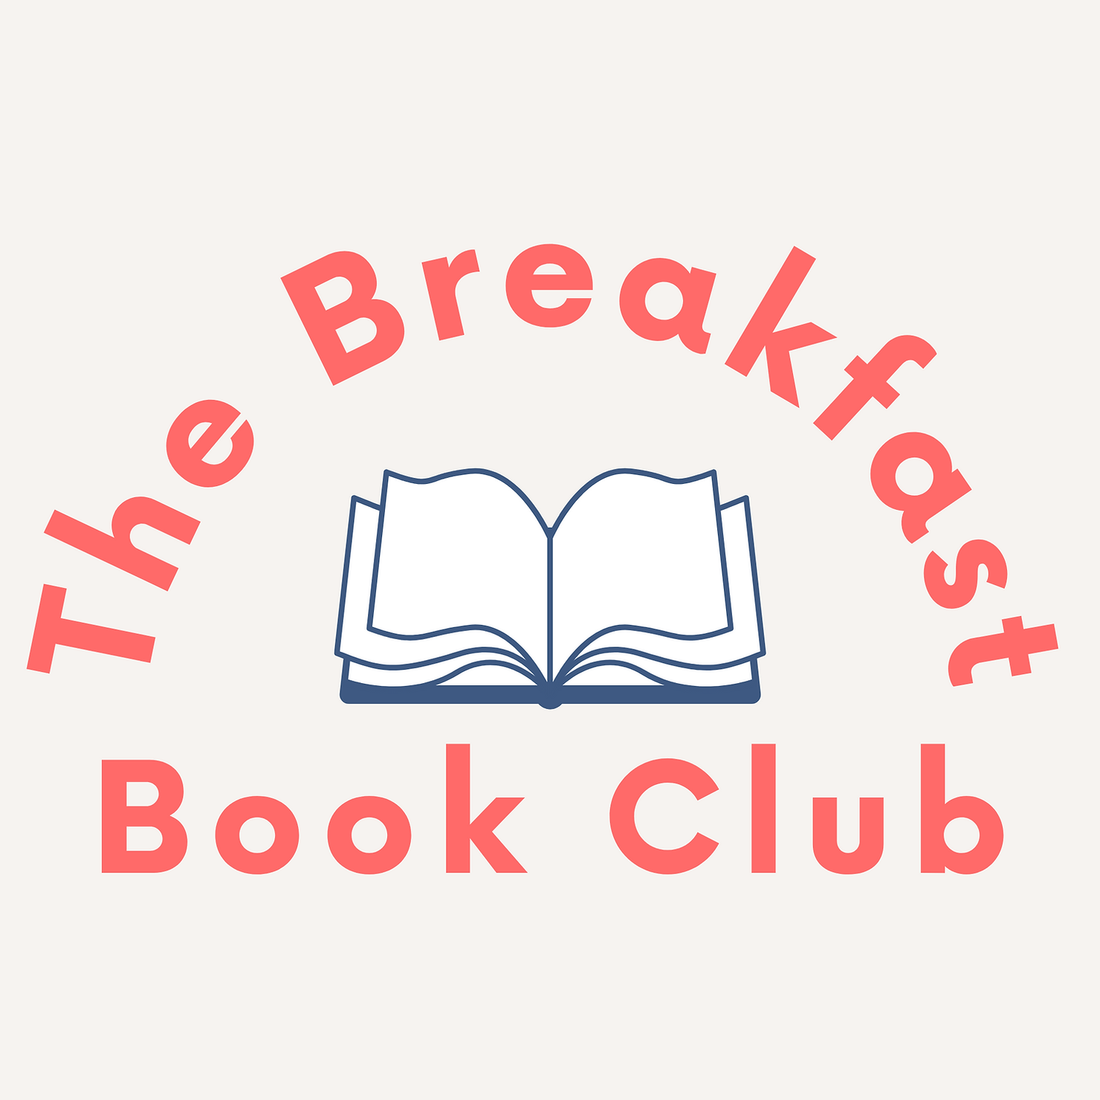 The All-New Book Club!